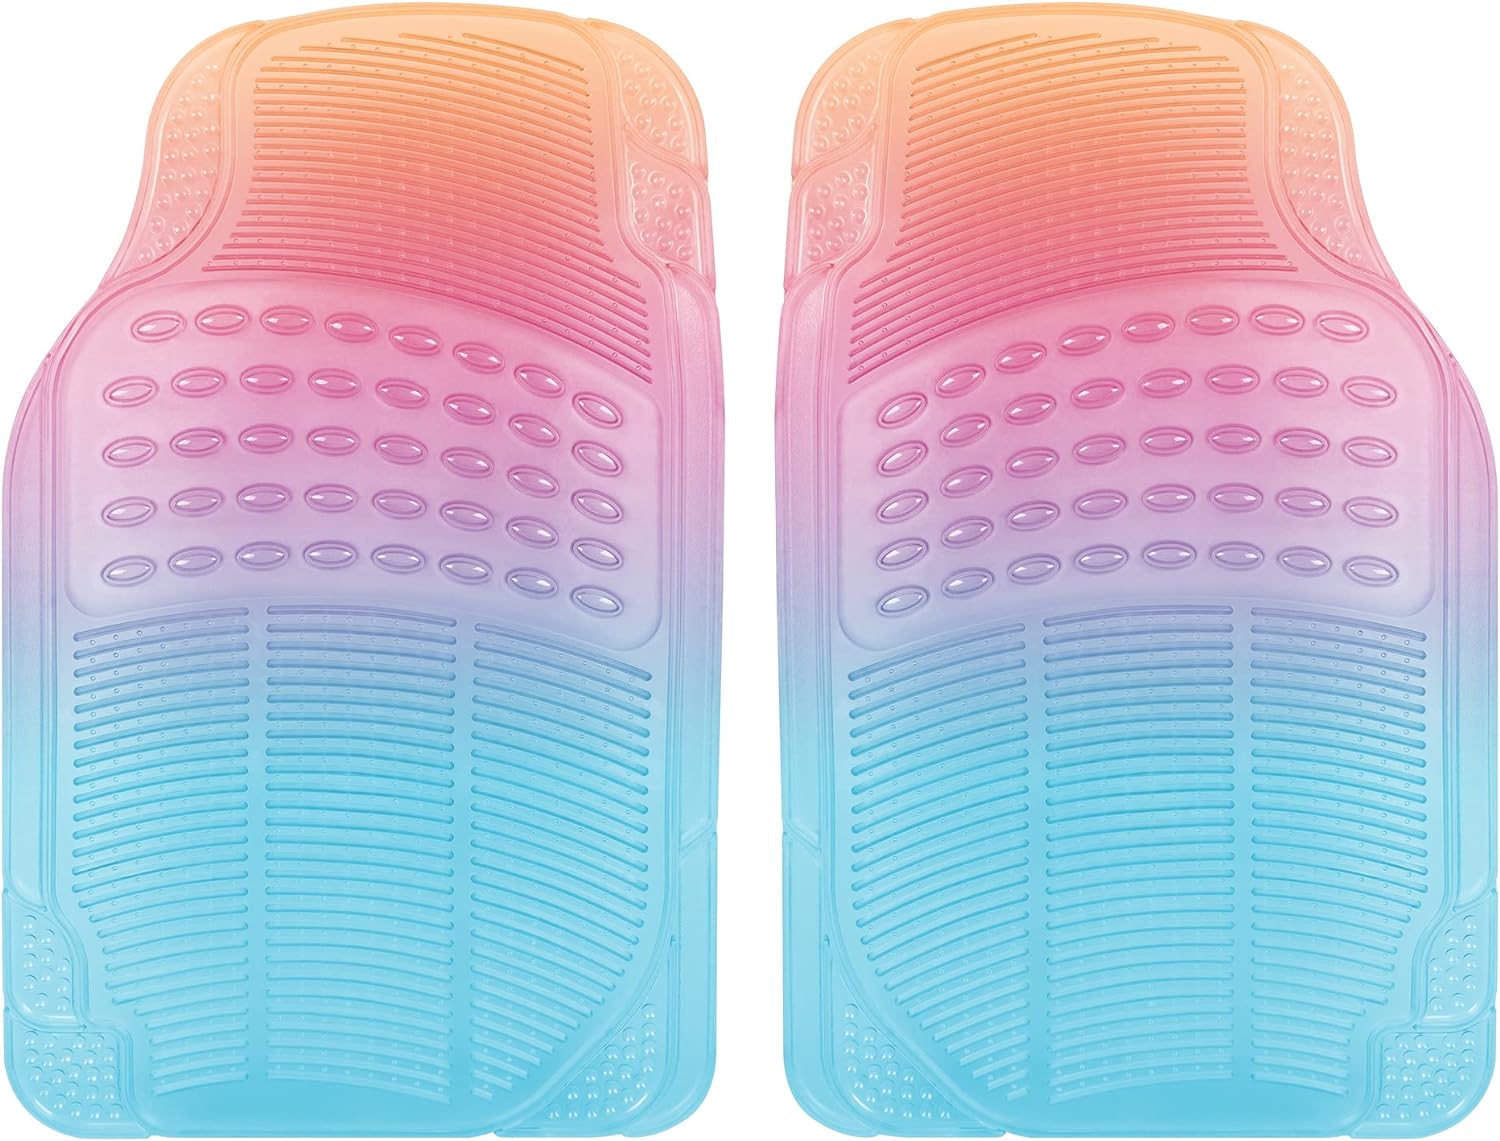 Automotive Floor Mats for Cars, 2 Piece Car Floor Mats, Trim-to-Fit All Weather Car Mats for Auto Truck Van SUV, Car Accessories for Women